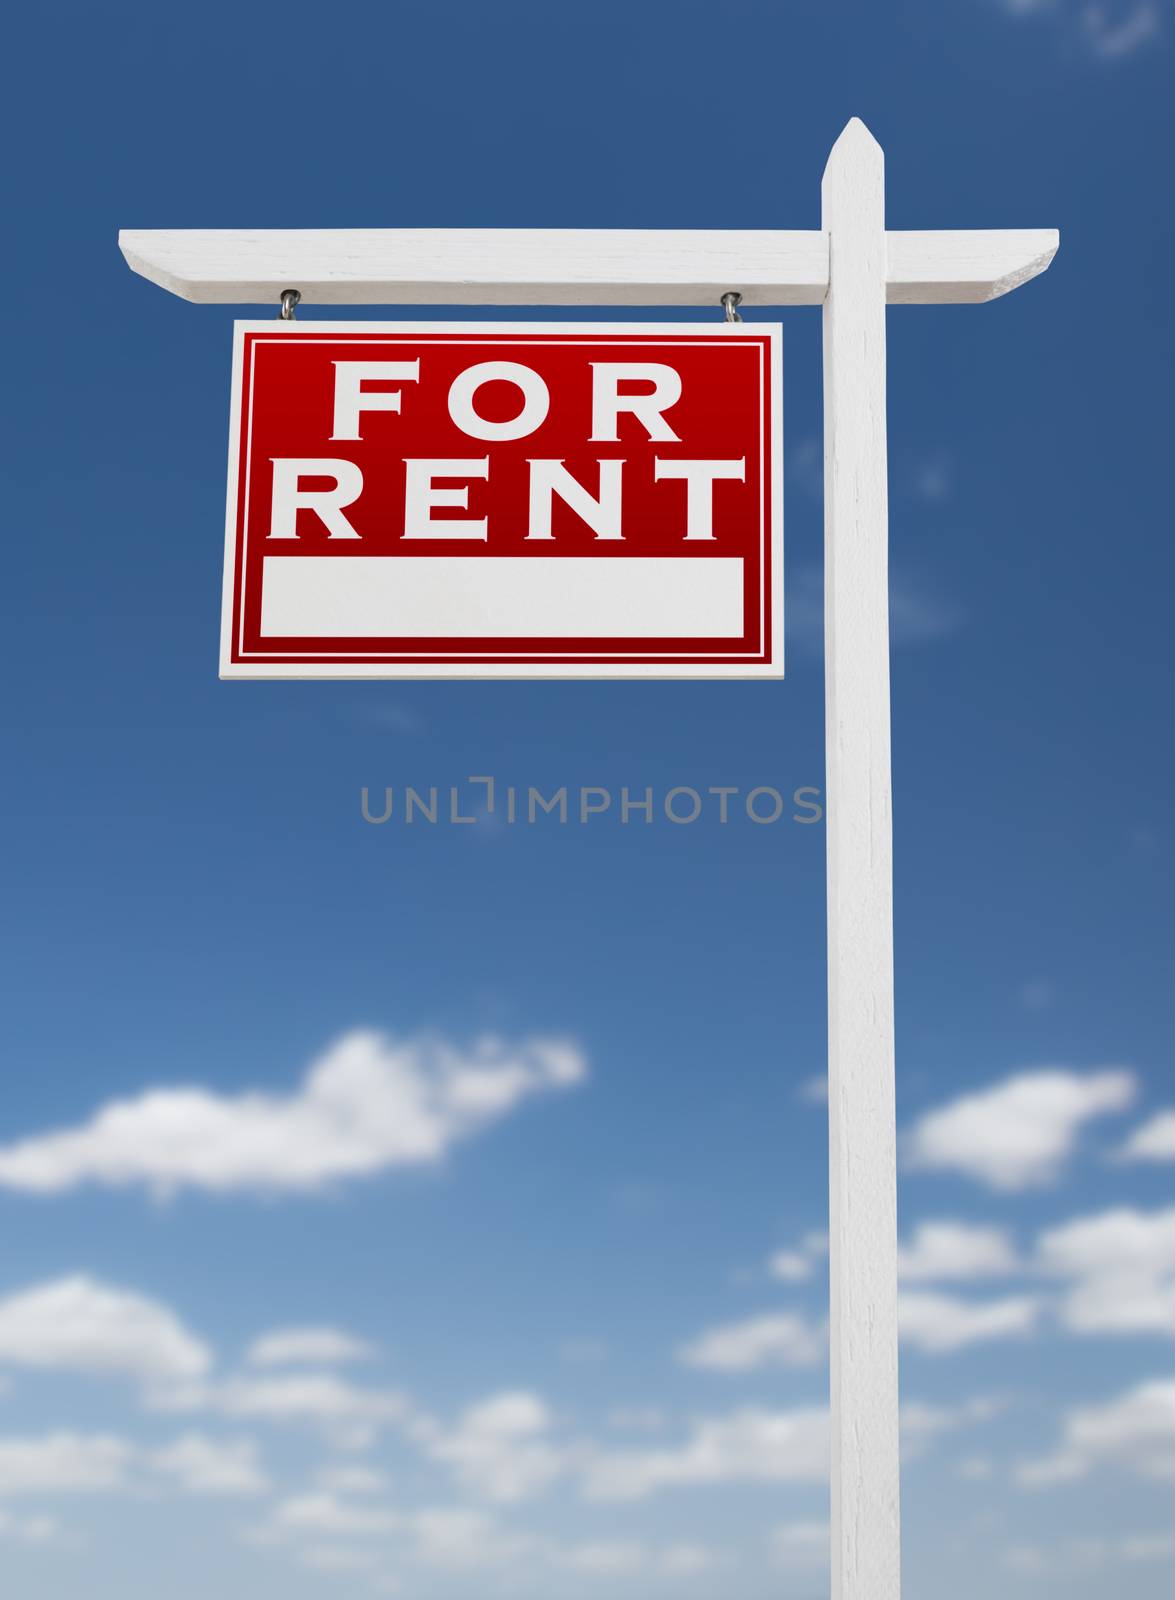 Left Facing For Rent Real Estate Sign on a Blue Sky with Clouds. by Feverpitched